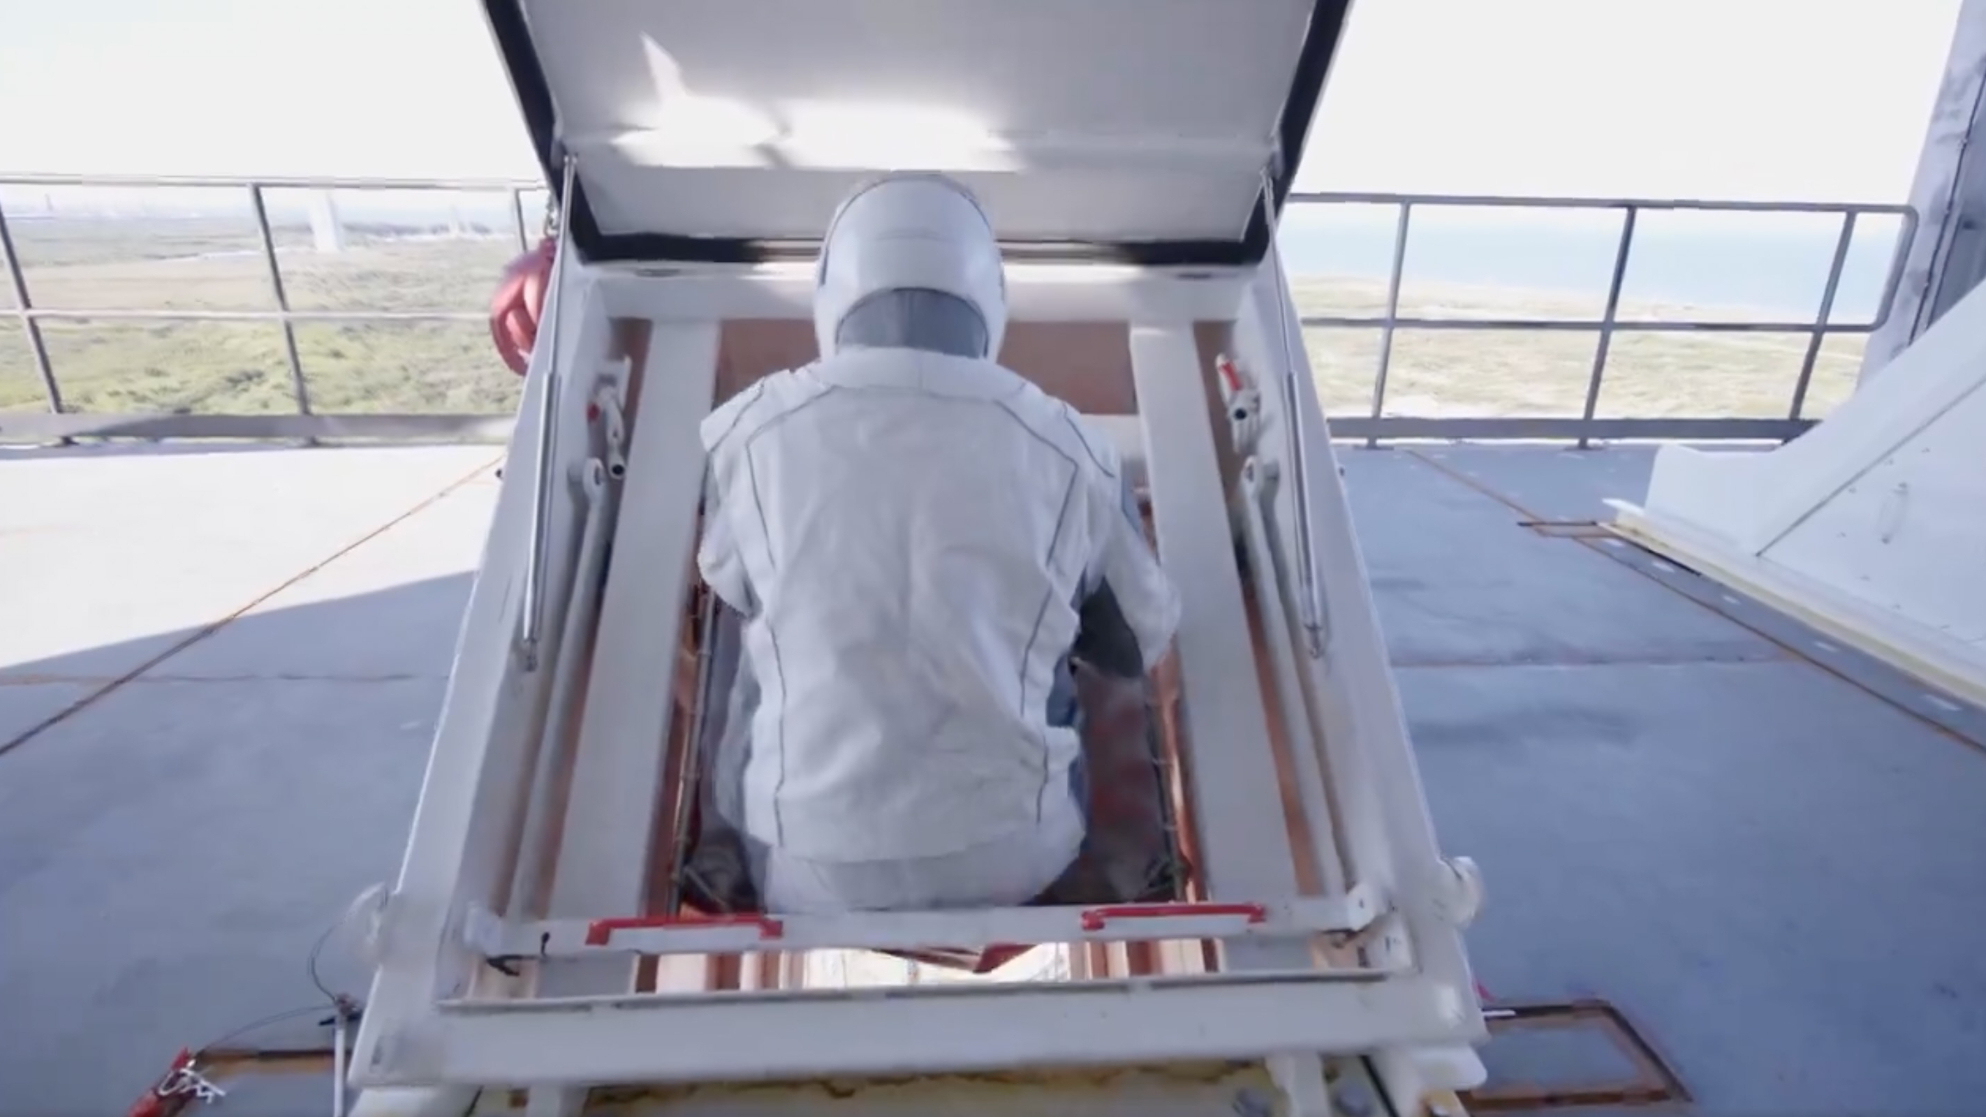 Whee! Zip down from the launch tower in SpaceX's new emergency-escape slide (video)